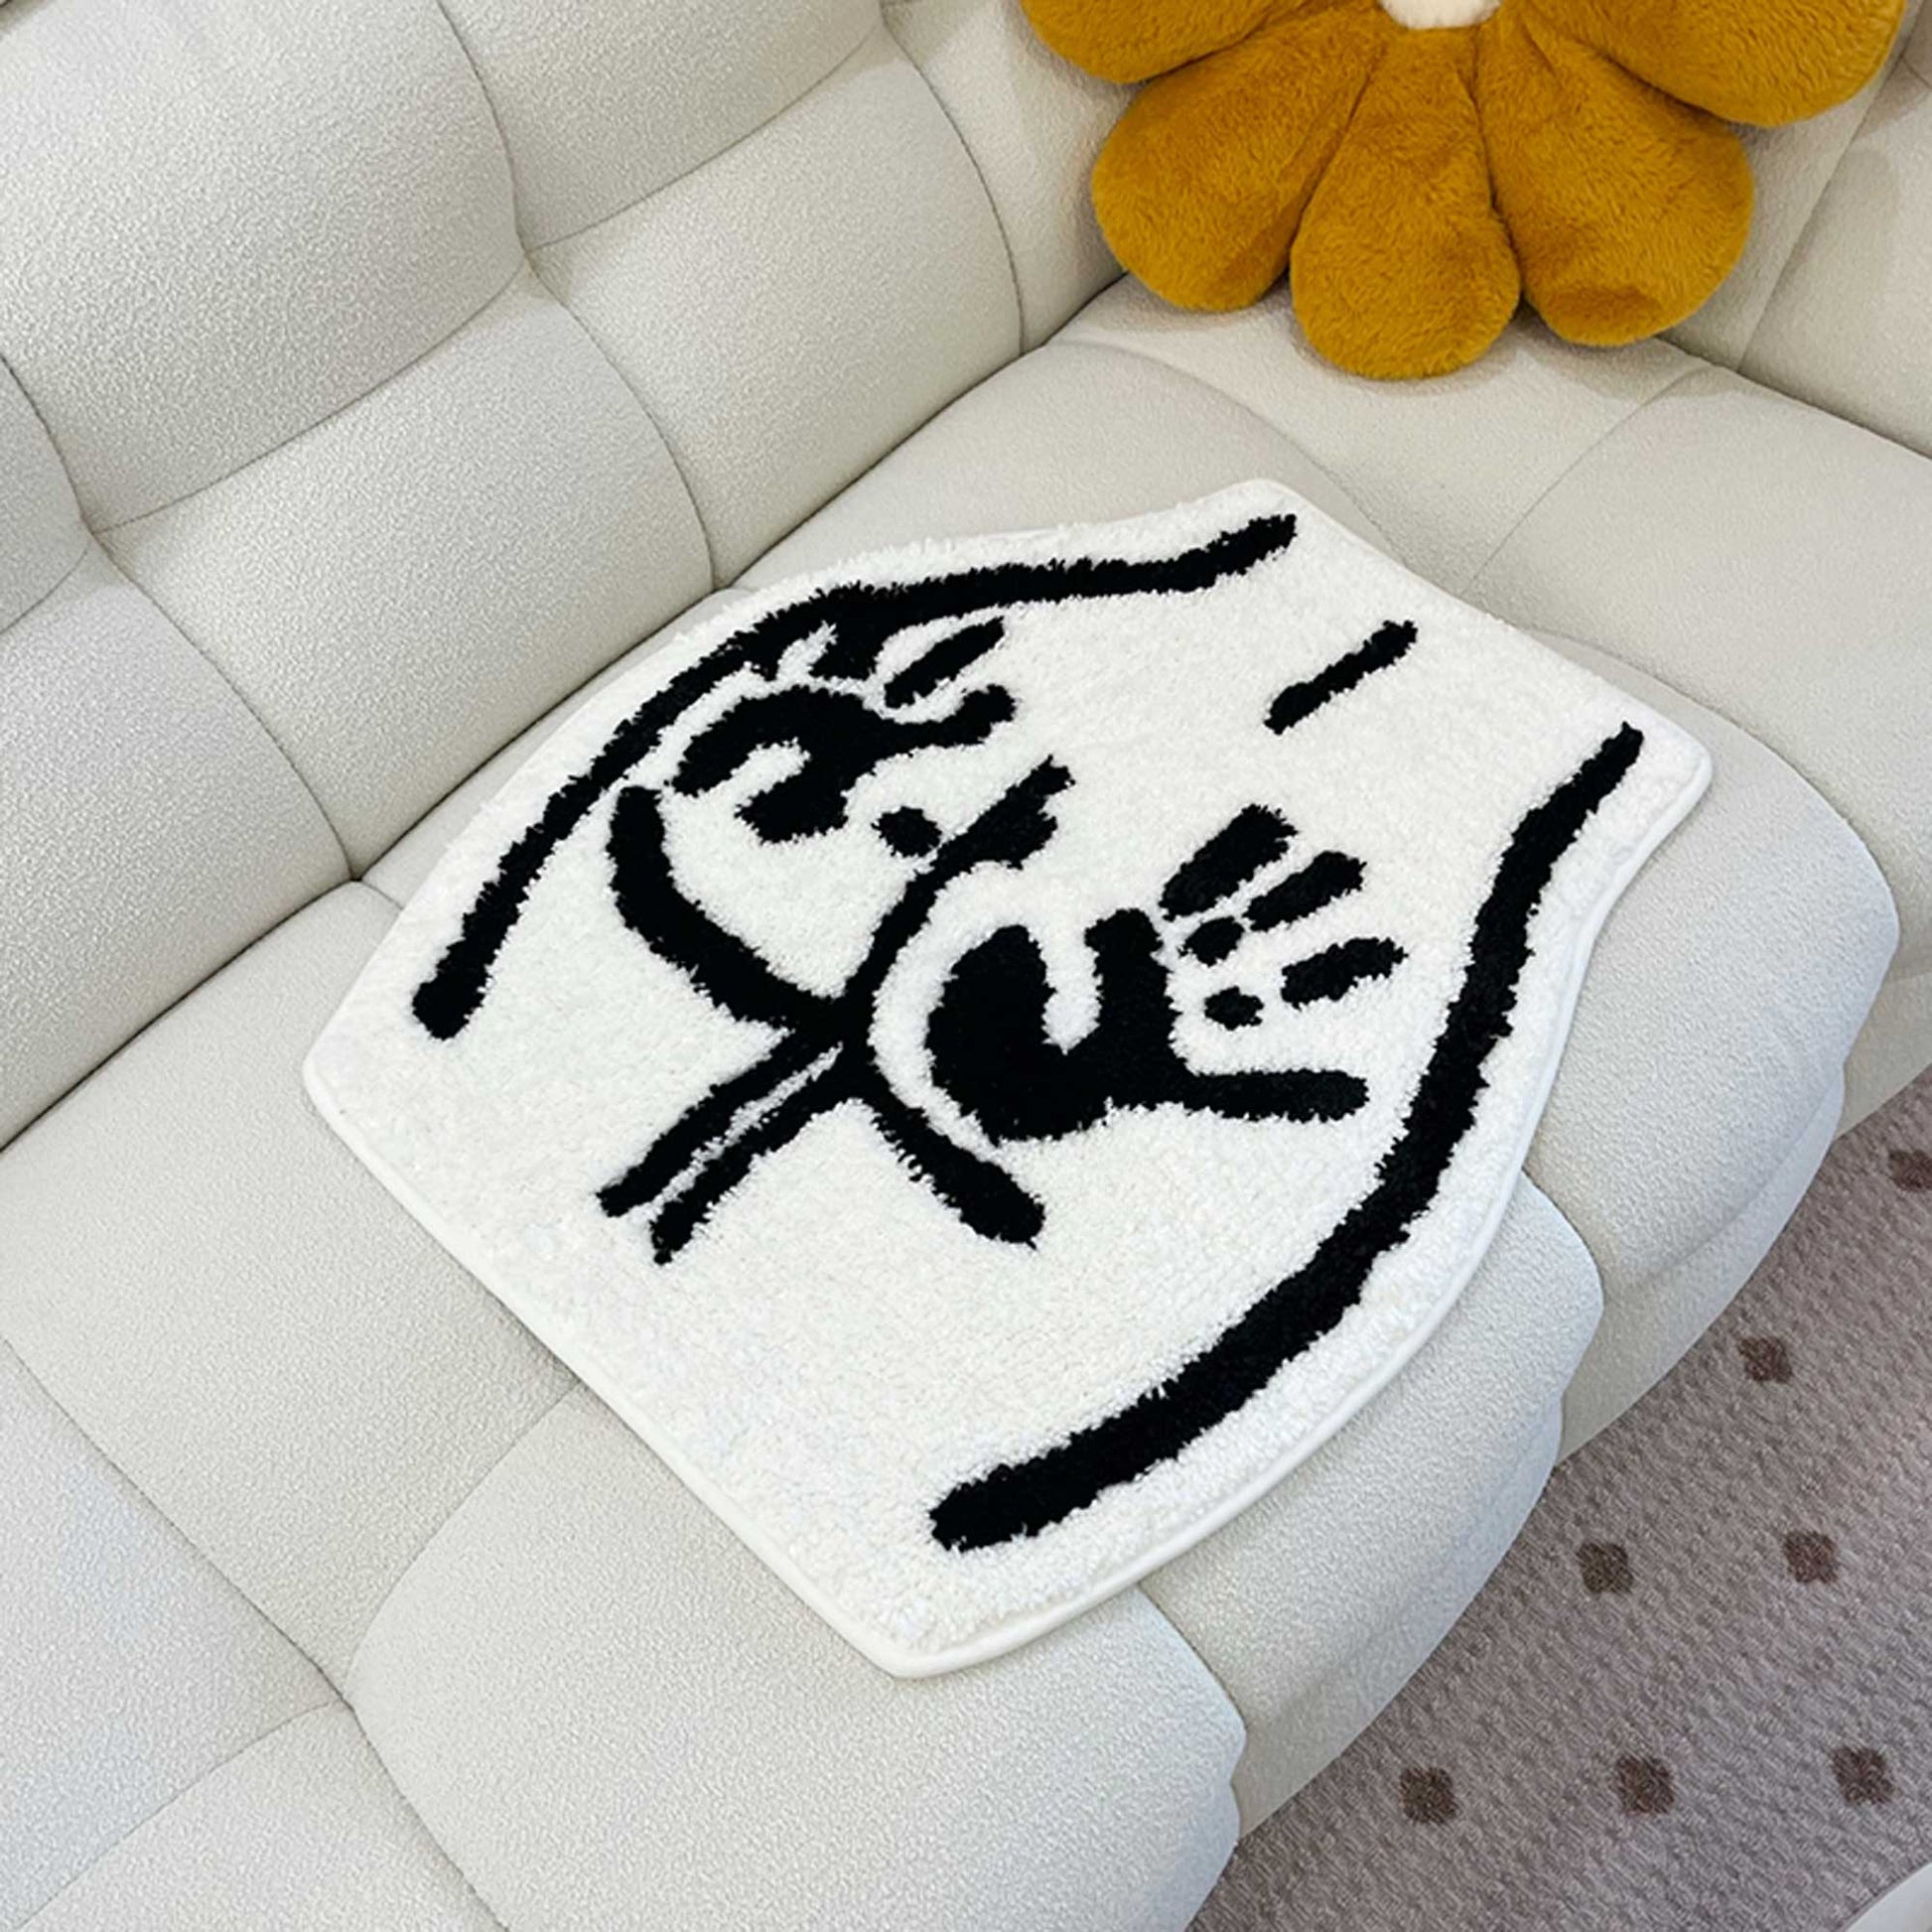 Tufted Rug Handprint on Booty Rug Front on a Sofa